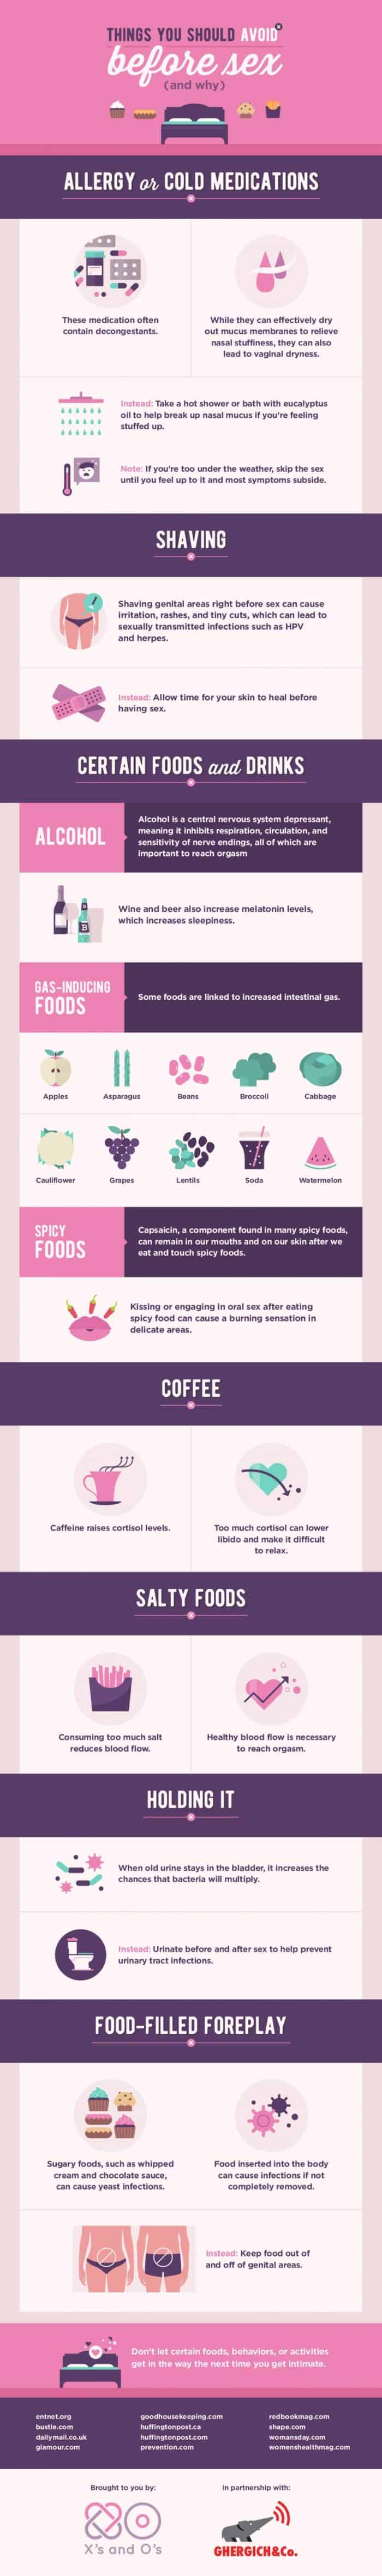 Things you should avoid before sex infographic